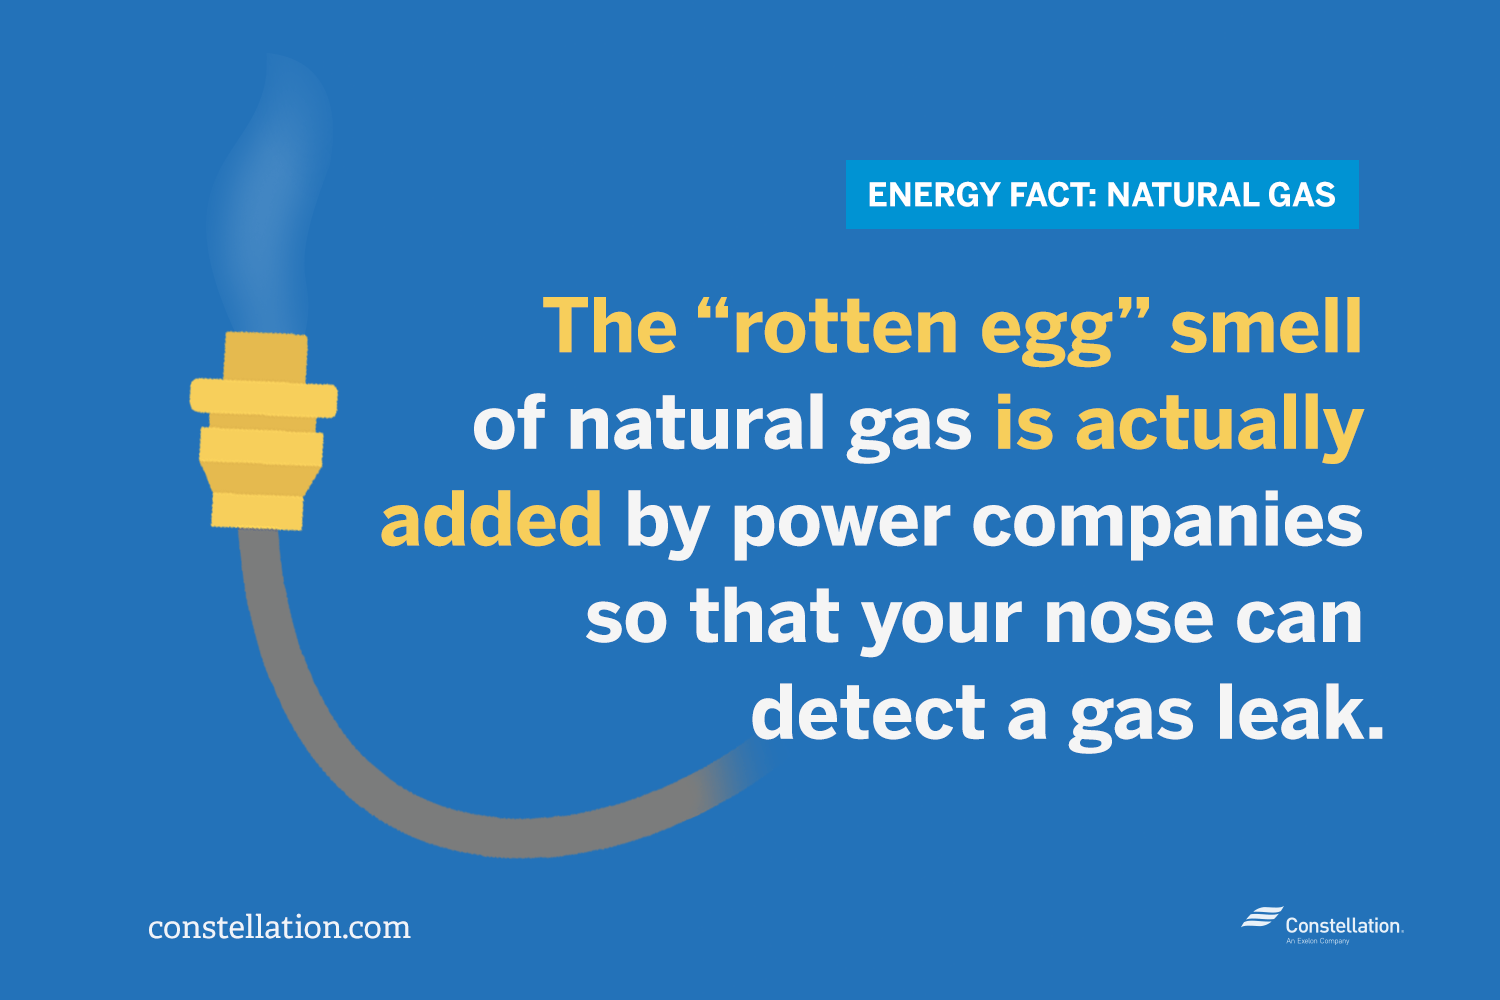 The "rotten smell" is added to the natural gas so your nose can detect a gas leak